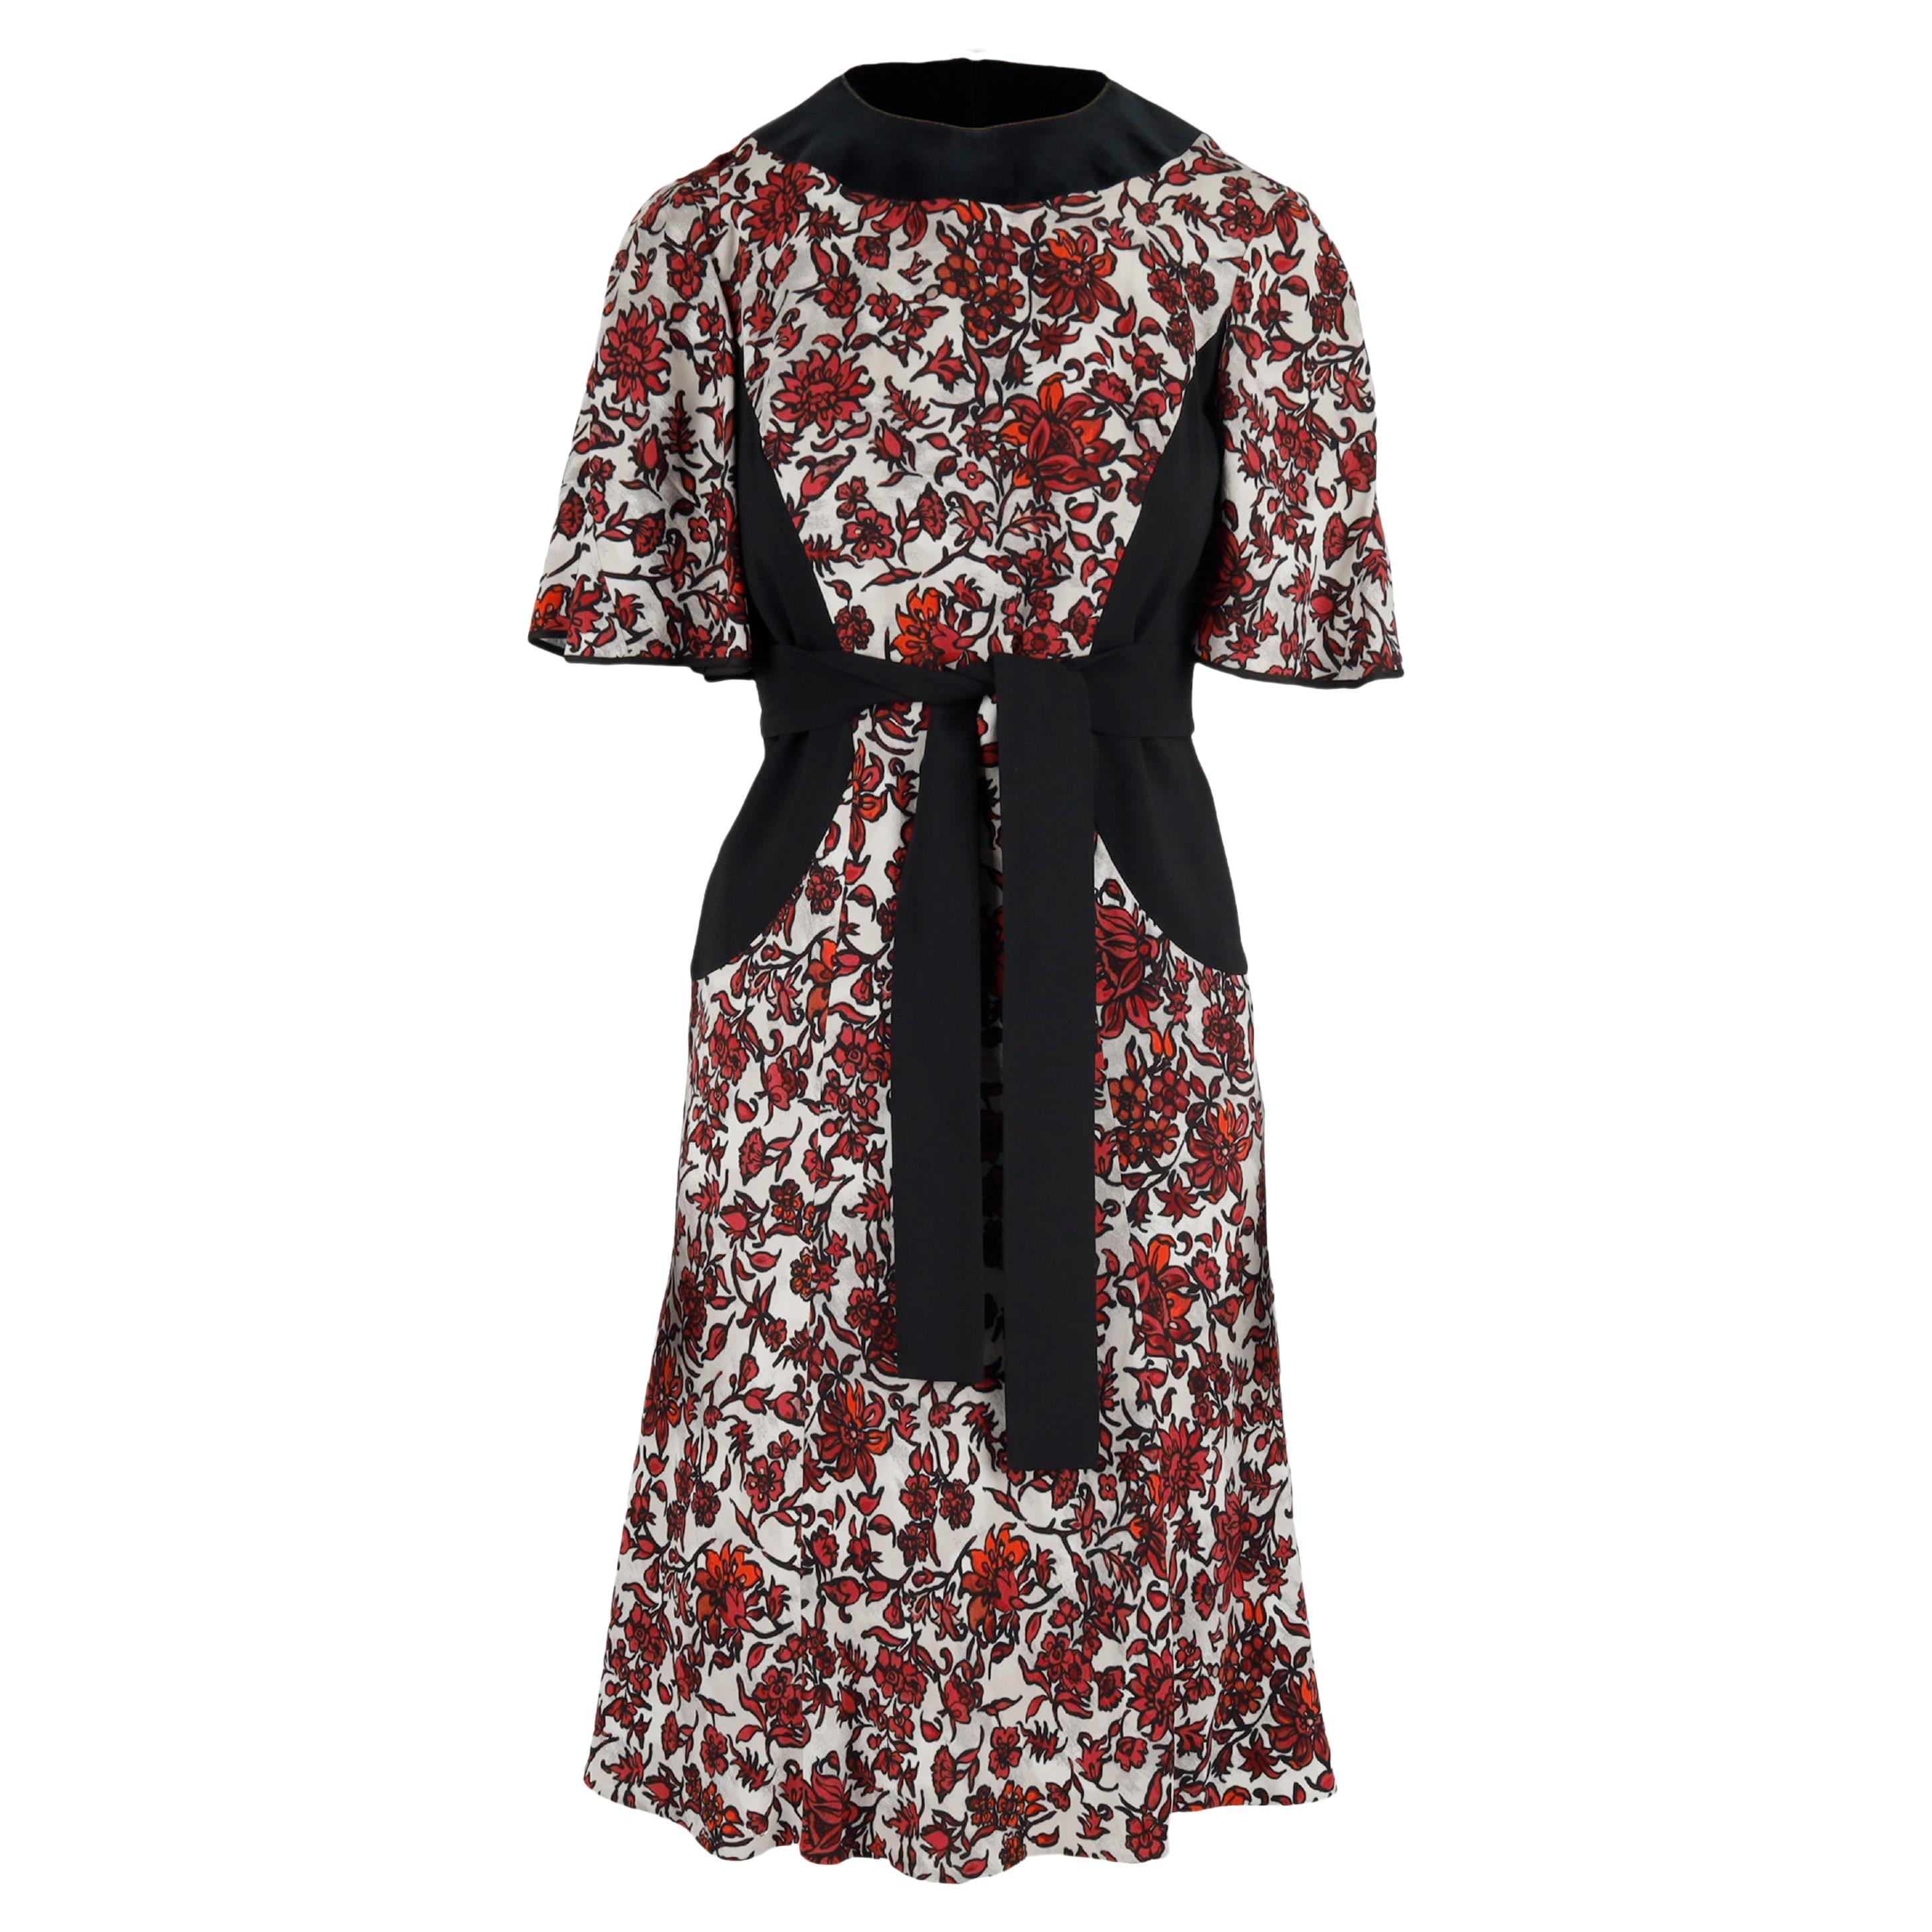 Louis Vuitton Red Black Floral Printed Dress For Sale